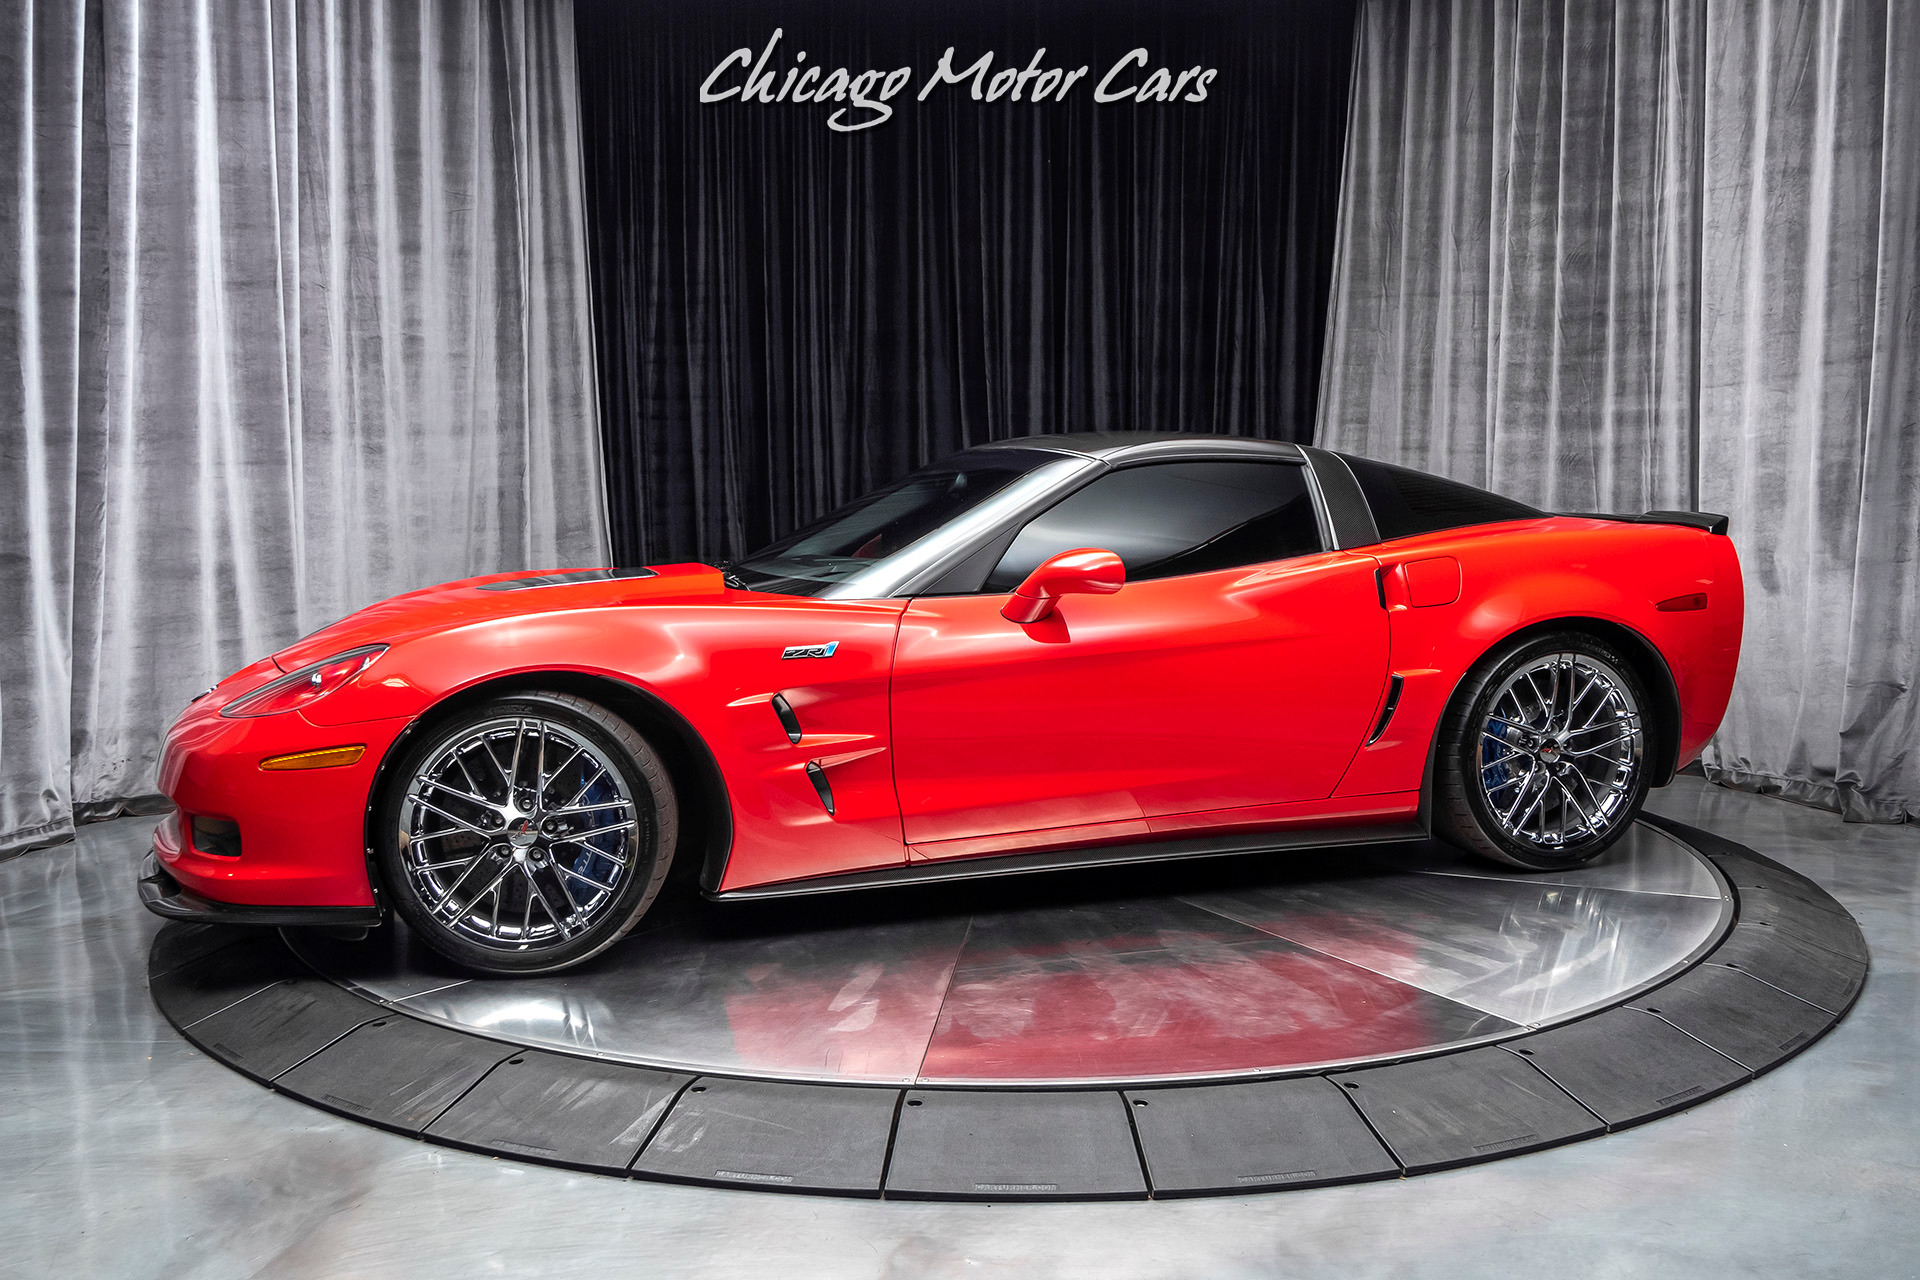 Used-2011-Chevrolet-Corvette-ZR1-3ZR-Coupe---PRISTINE-CONDITION-THROUGHOUT-ONLY-21K-MILES